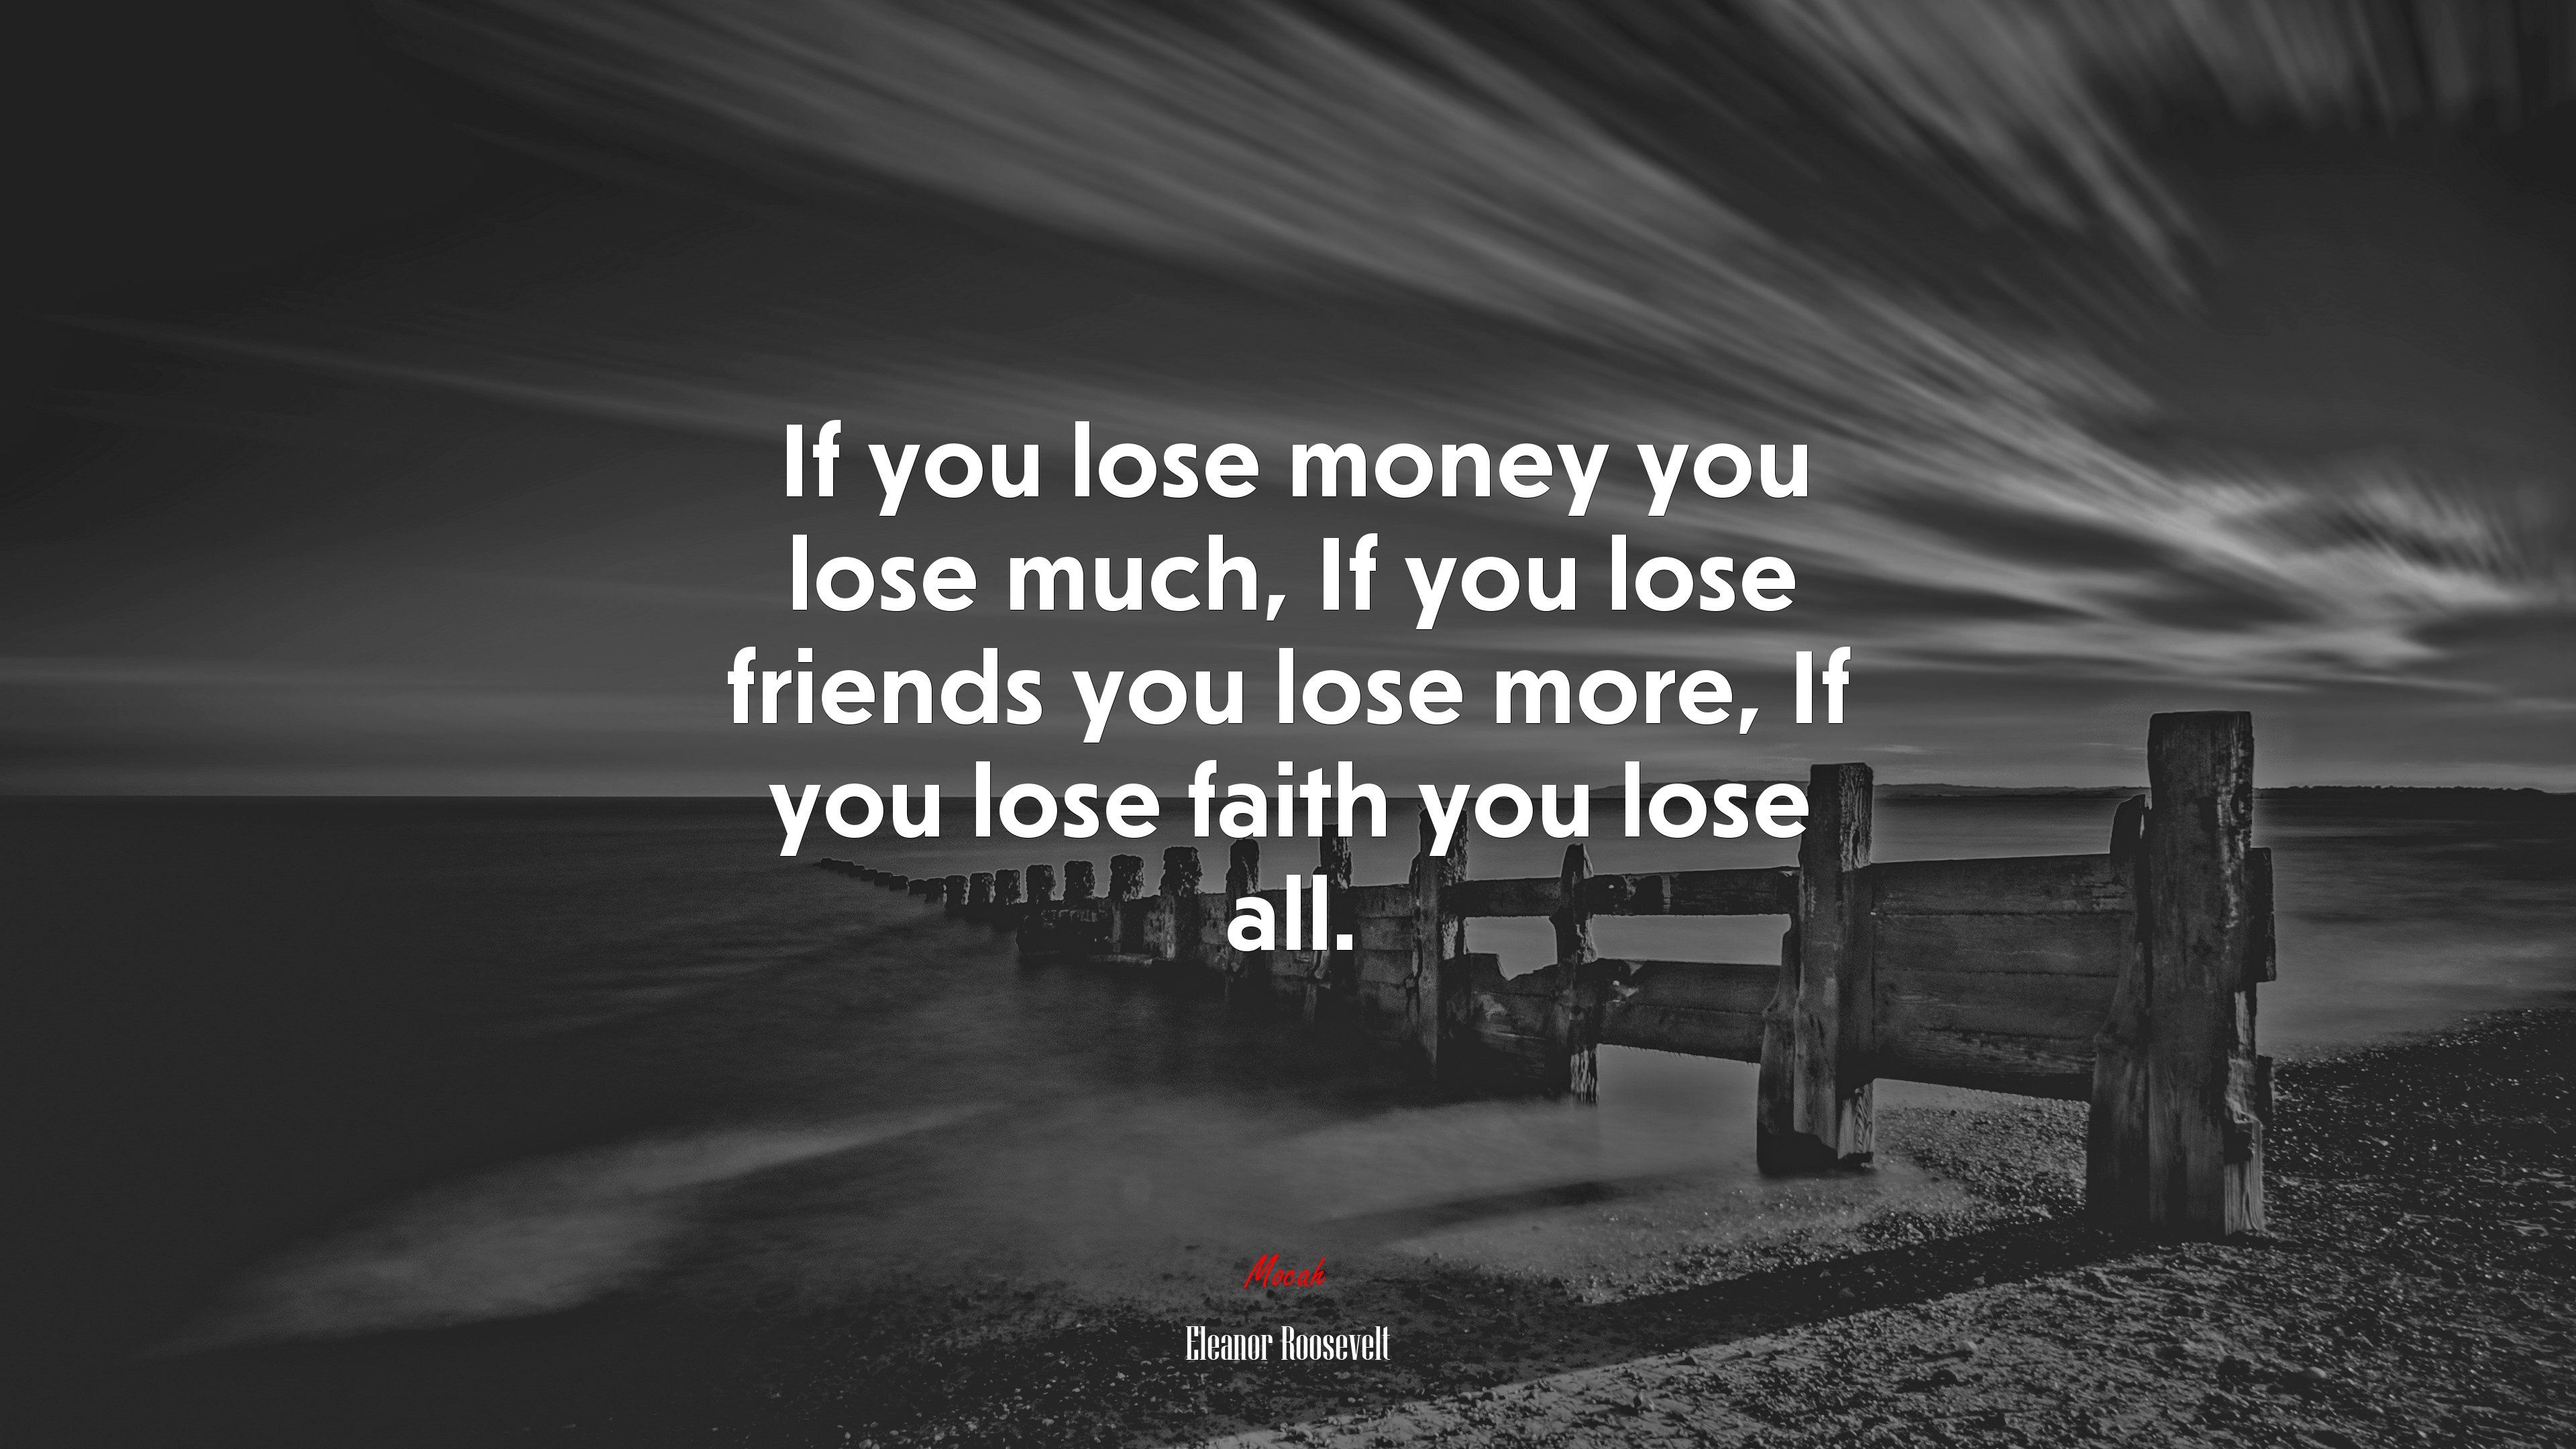 If you lose money you lose much, If you lose friends you lose more, If you lose faith you lose all. Eleanor Roosevelt quote, 4k wallpaper. Mocah HD Wallpaper